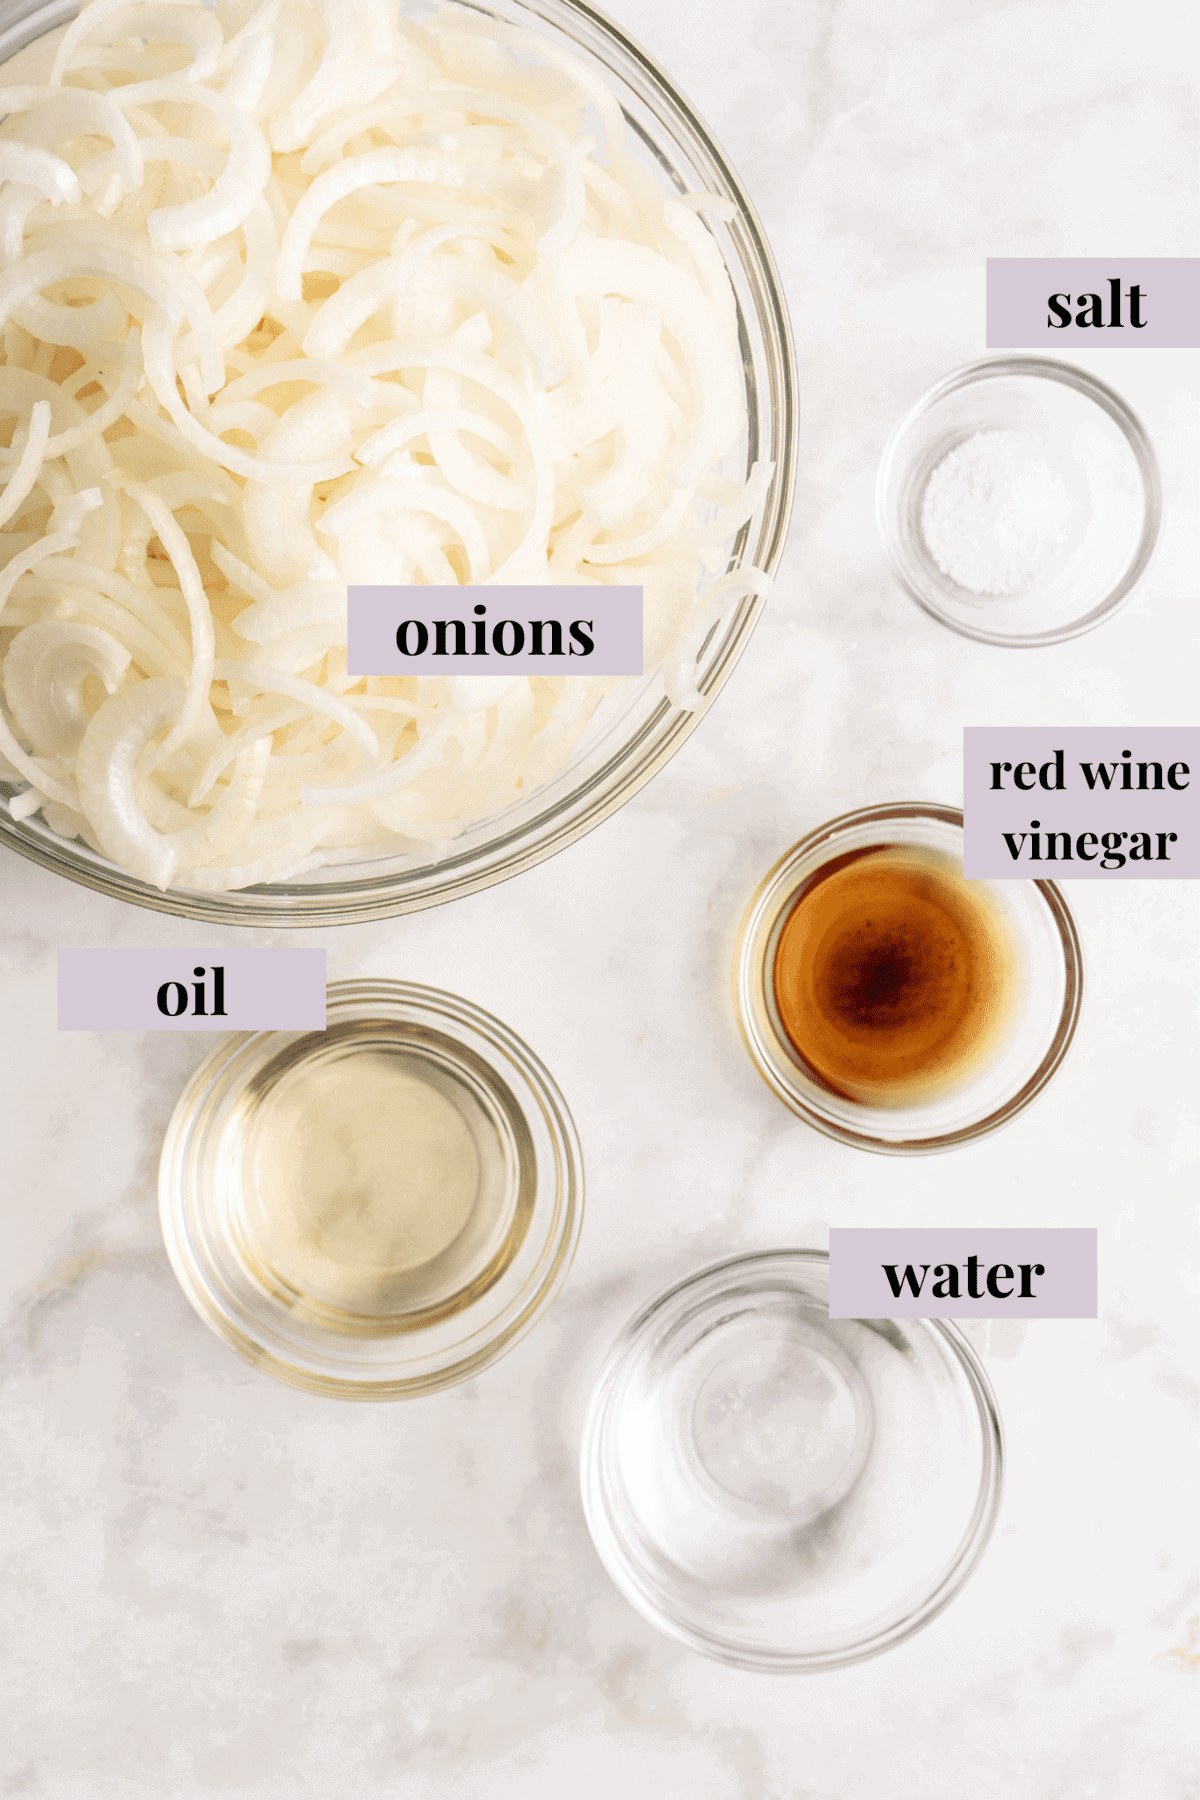 Caramelized onion ingredients with labels